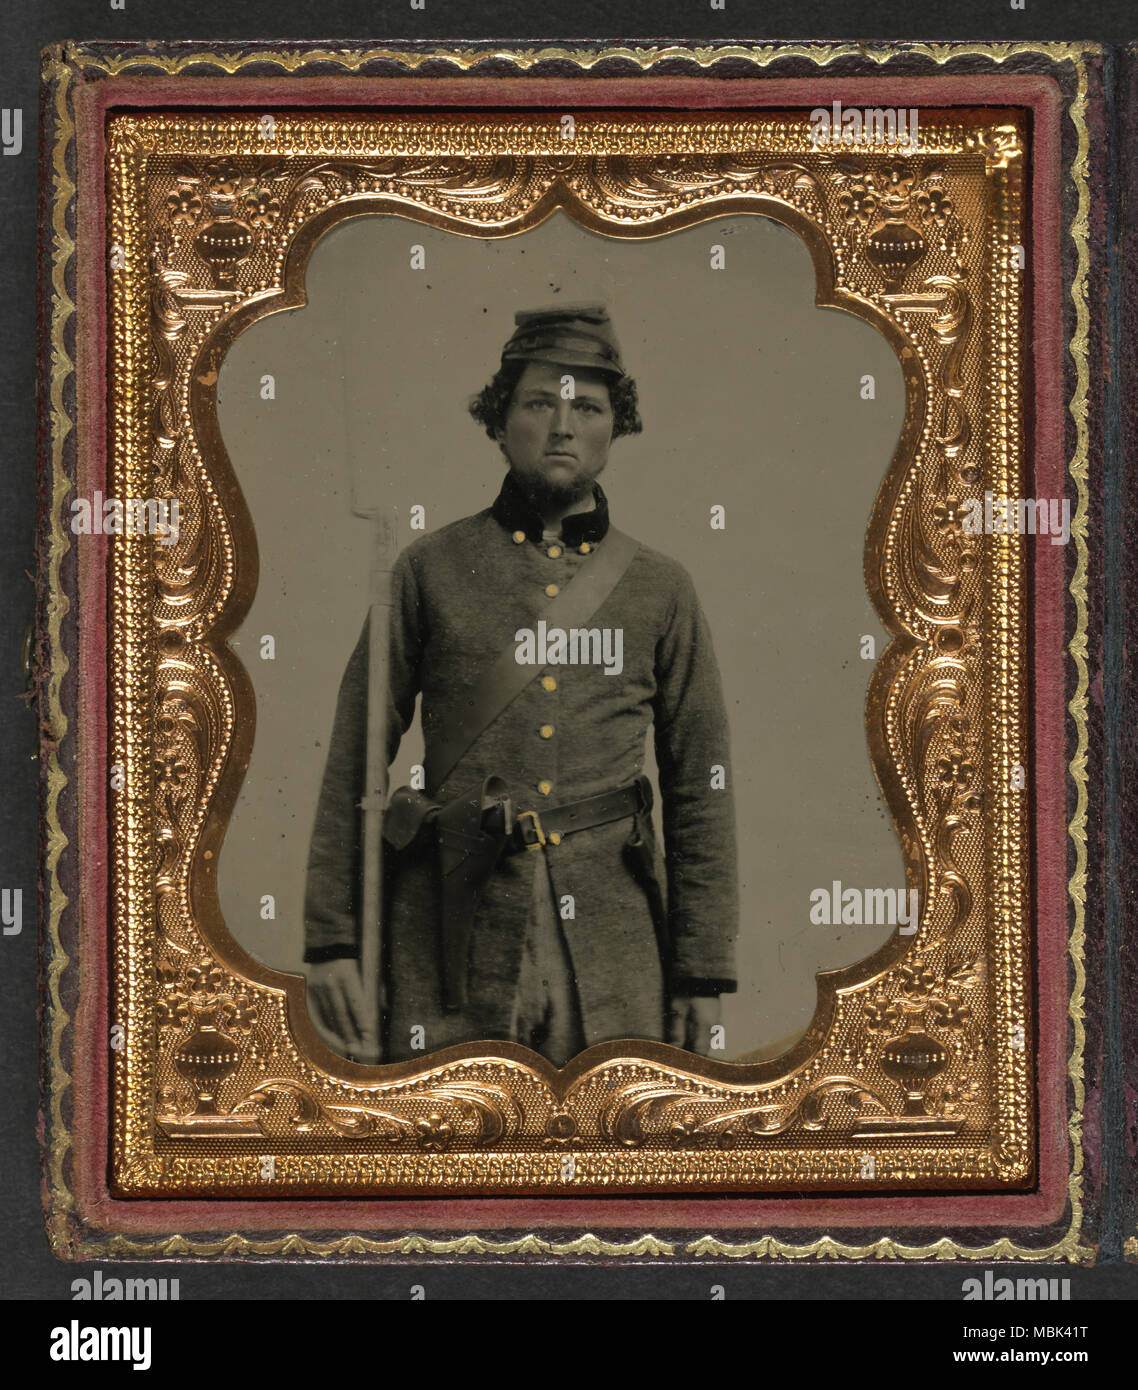 Confederate Soldier with frock coat and forage cap Stock Photo